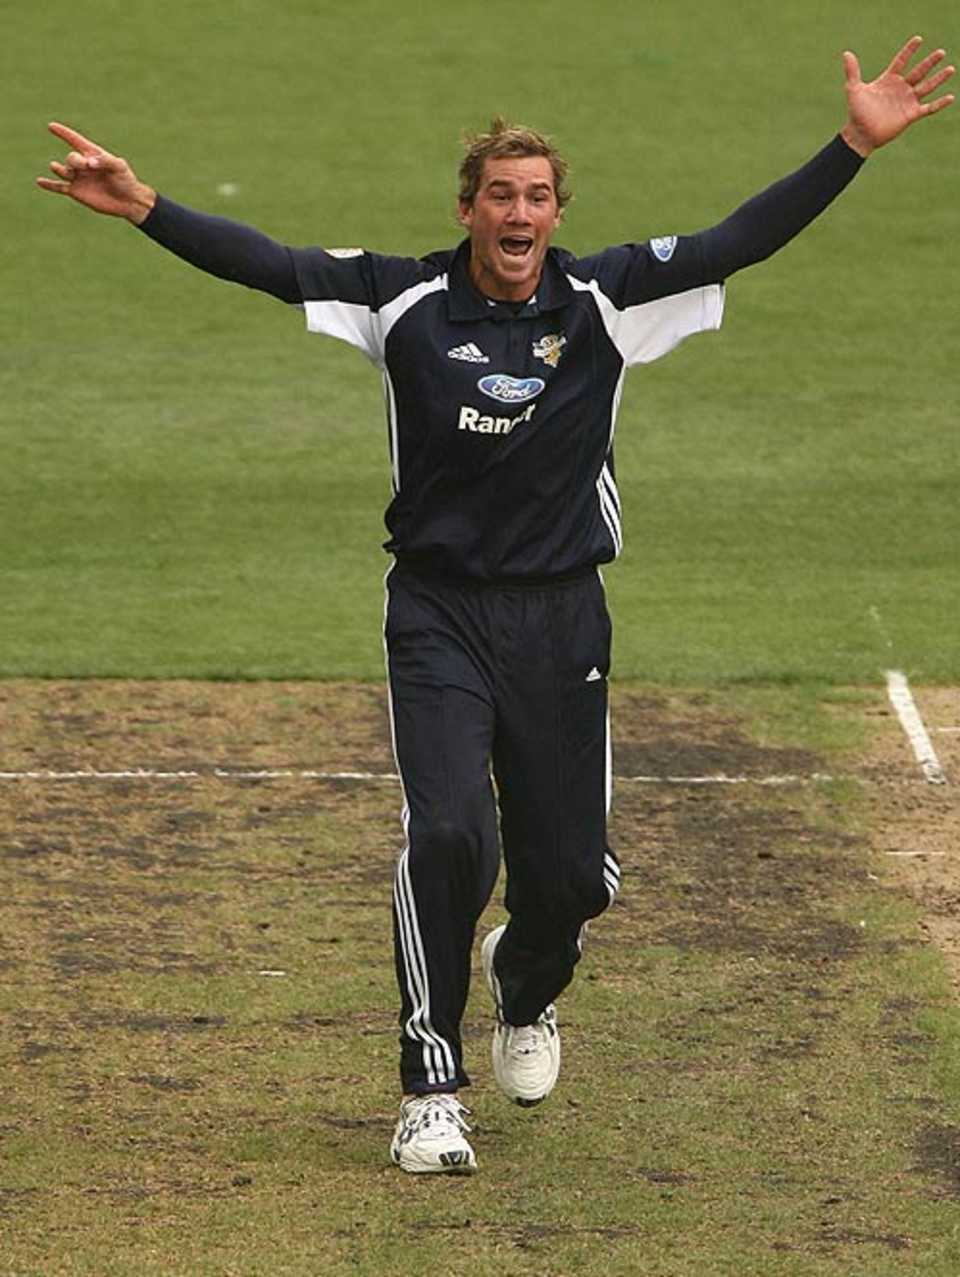 John Hastings celebrates a wicket, Victoria v New South Wales, FR Cup, Melbourne, November 28, 2007